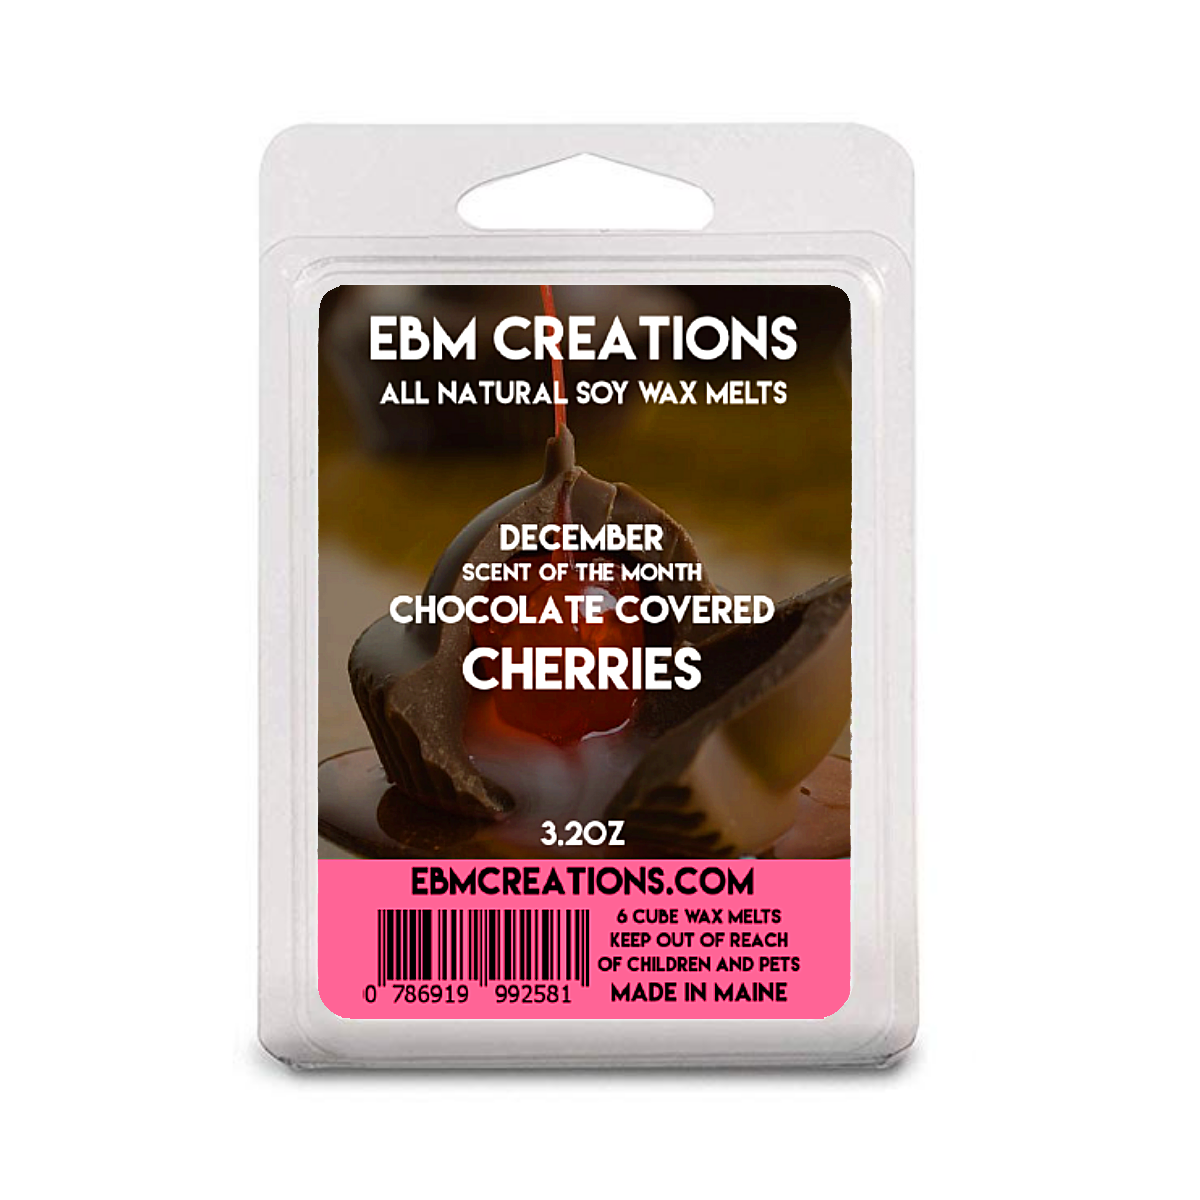 Chocolate Covered Cherries - 3.2 oz Clamshell